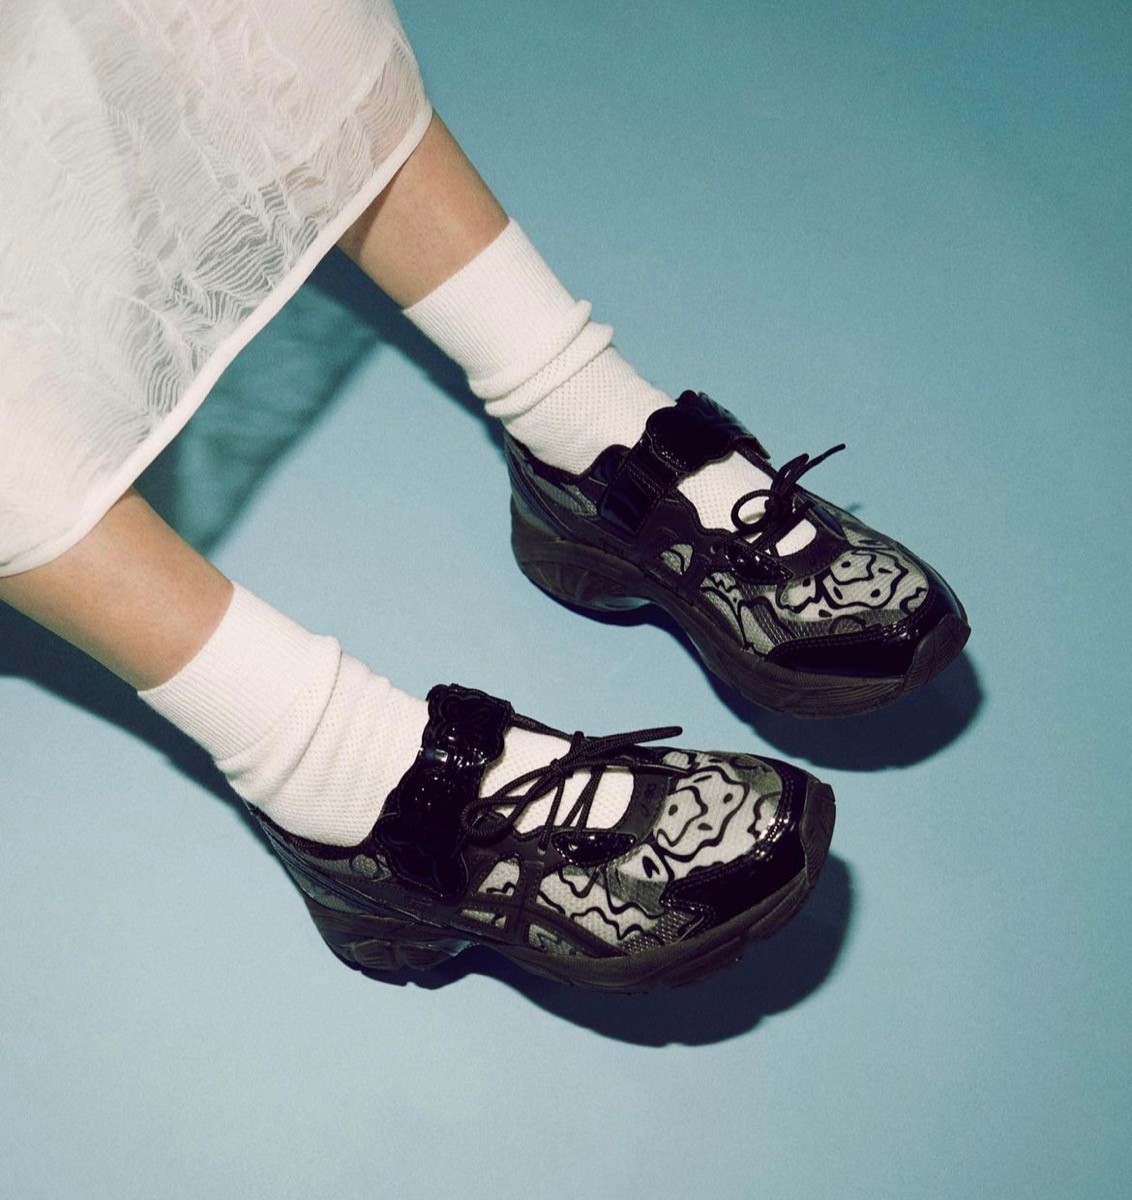 Cecilie Bahnsen × ASICS 『GT-2160』が国内7月19日より発売予定